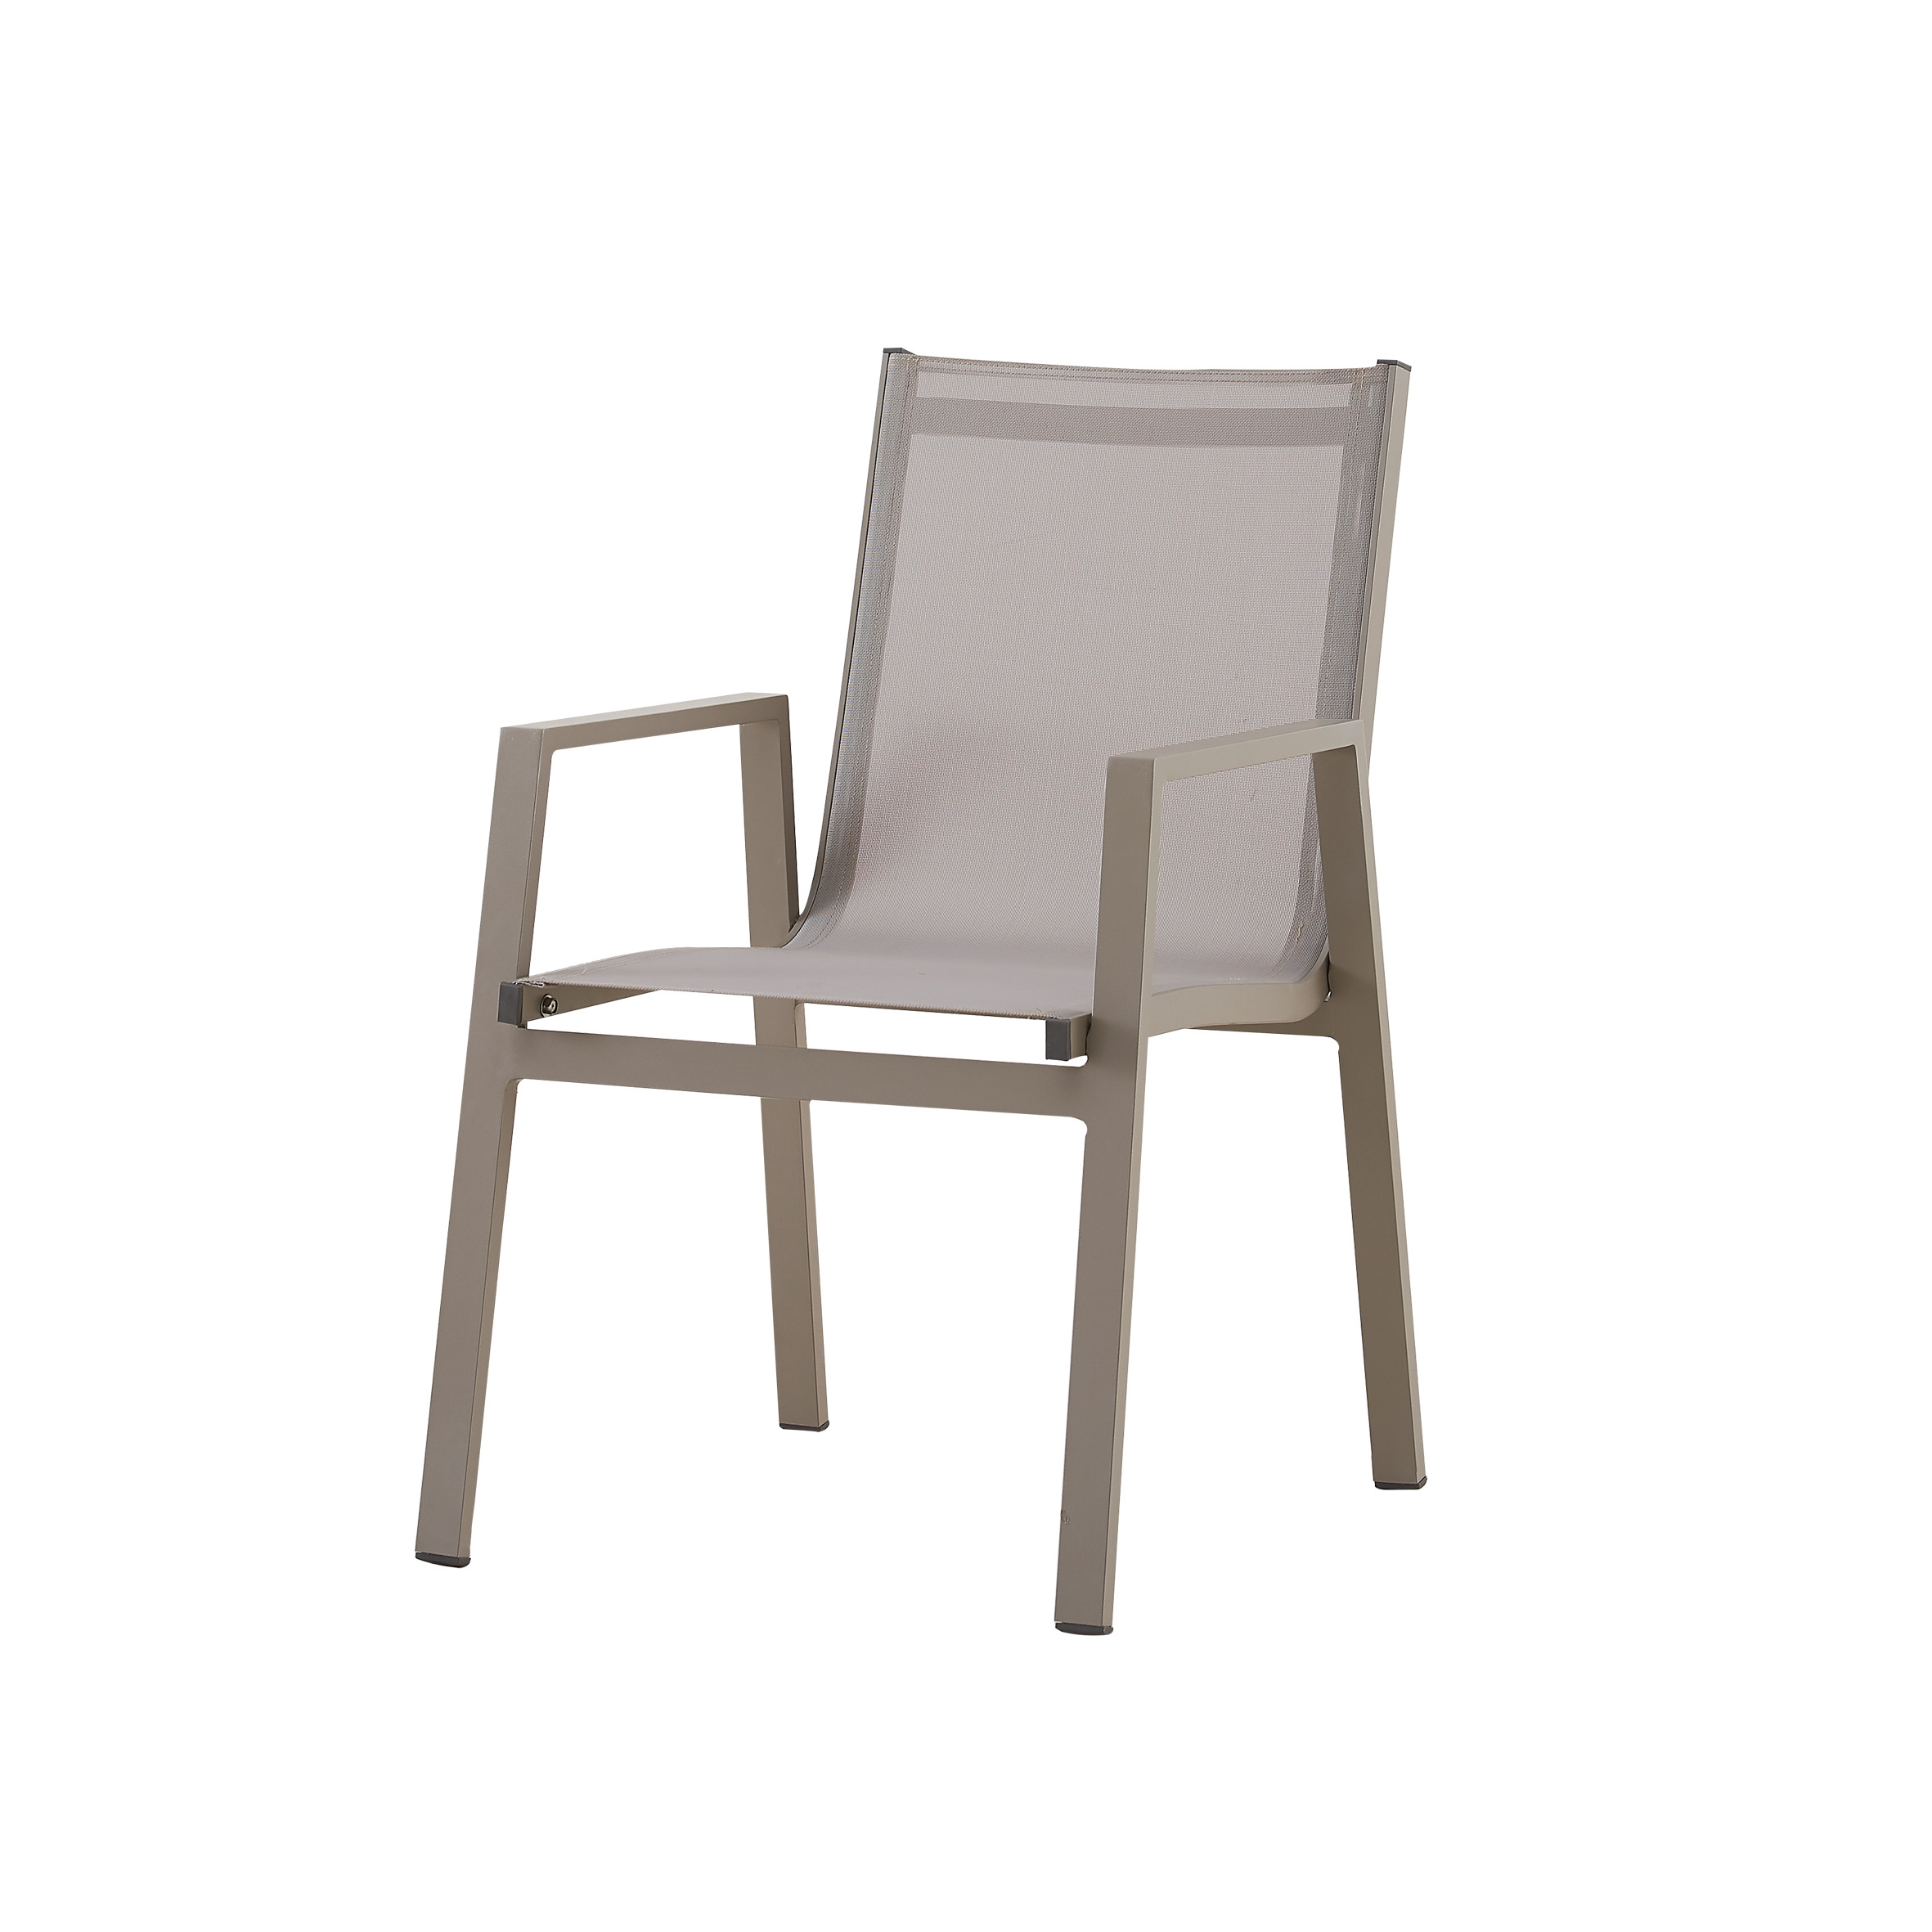 Snow white textile dining chair S8